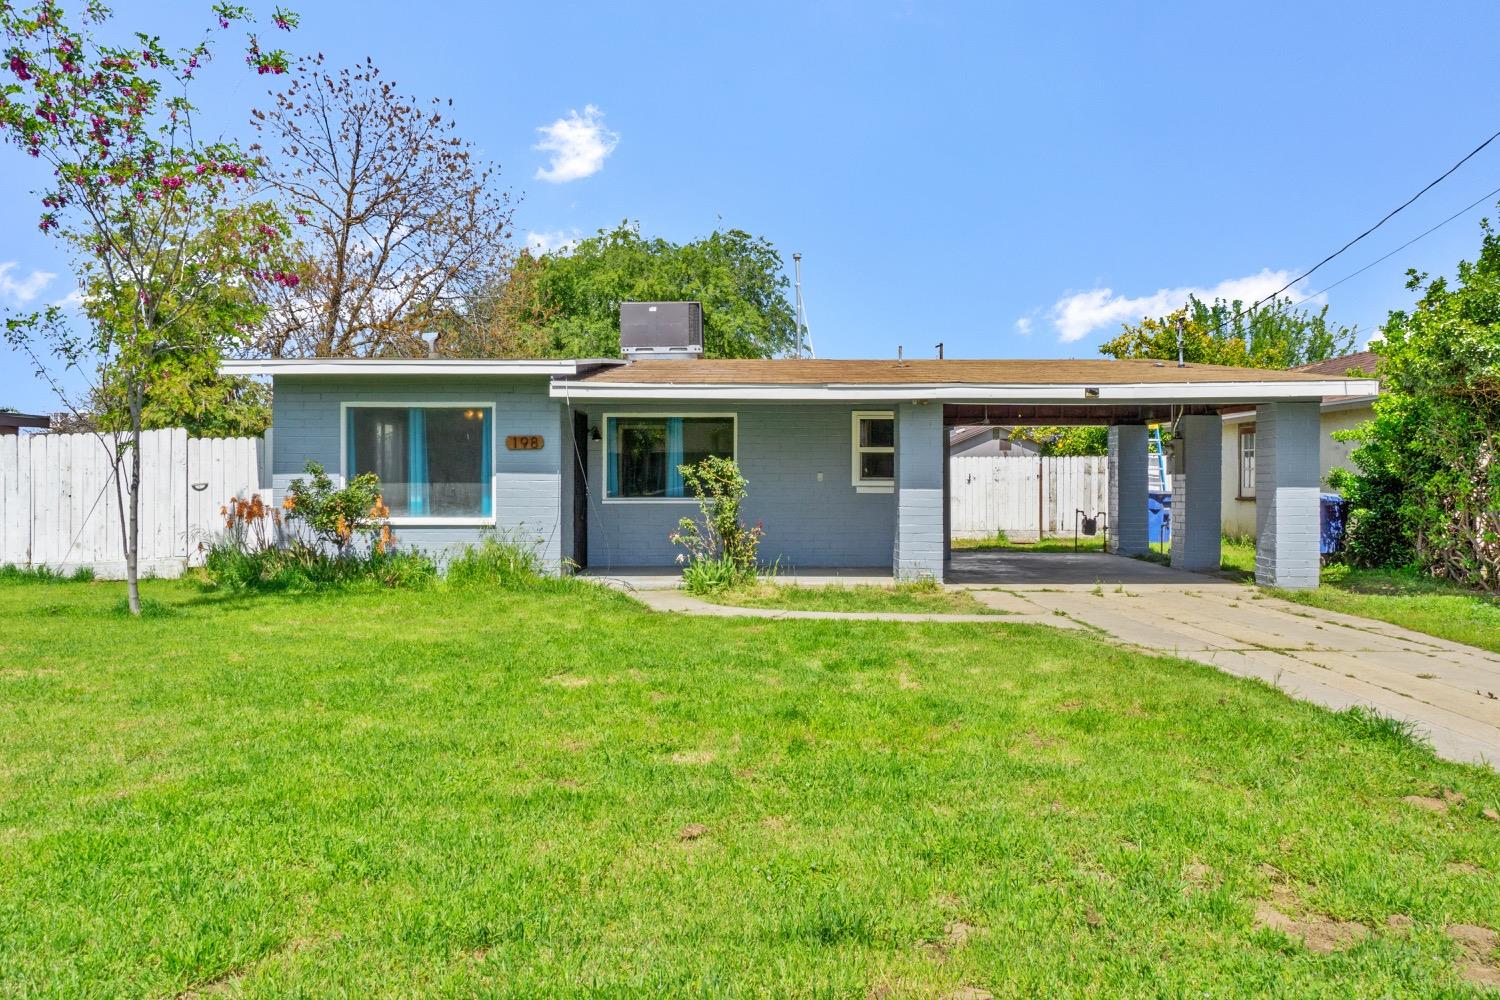 Photo of 198 W Stanley Ave in Reedley, CA